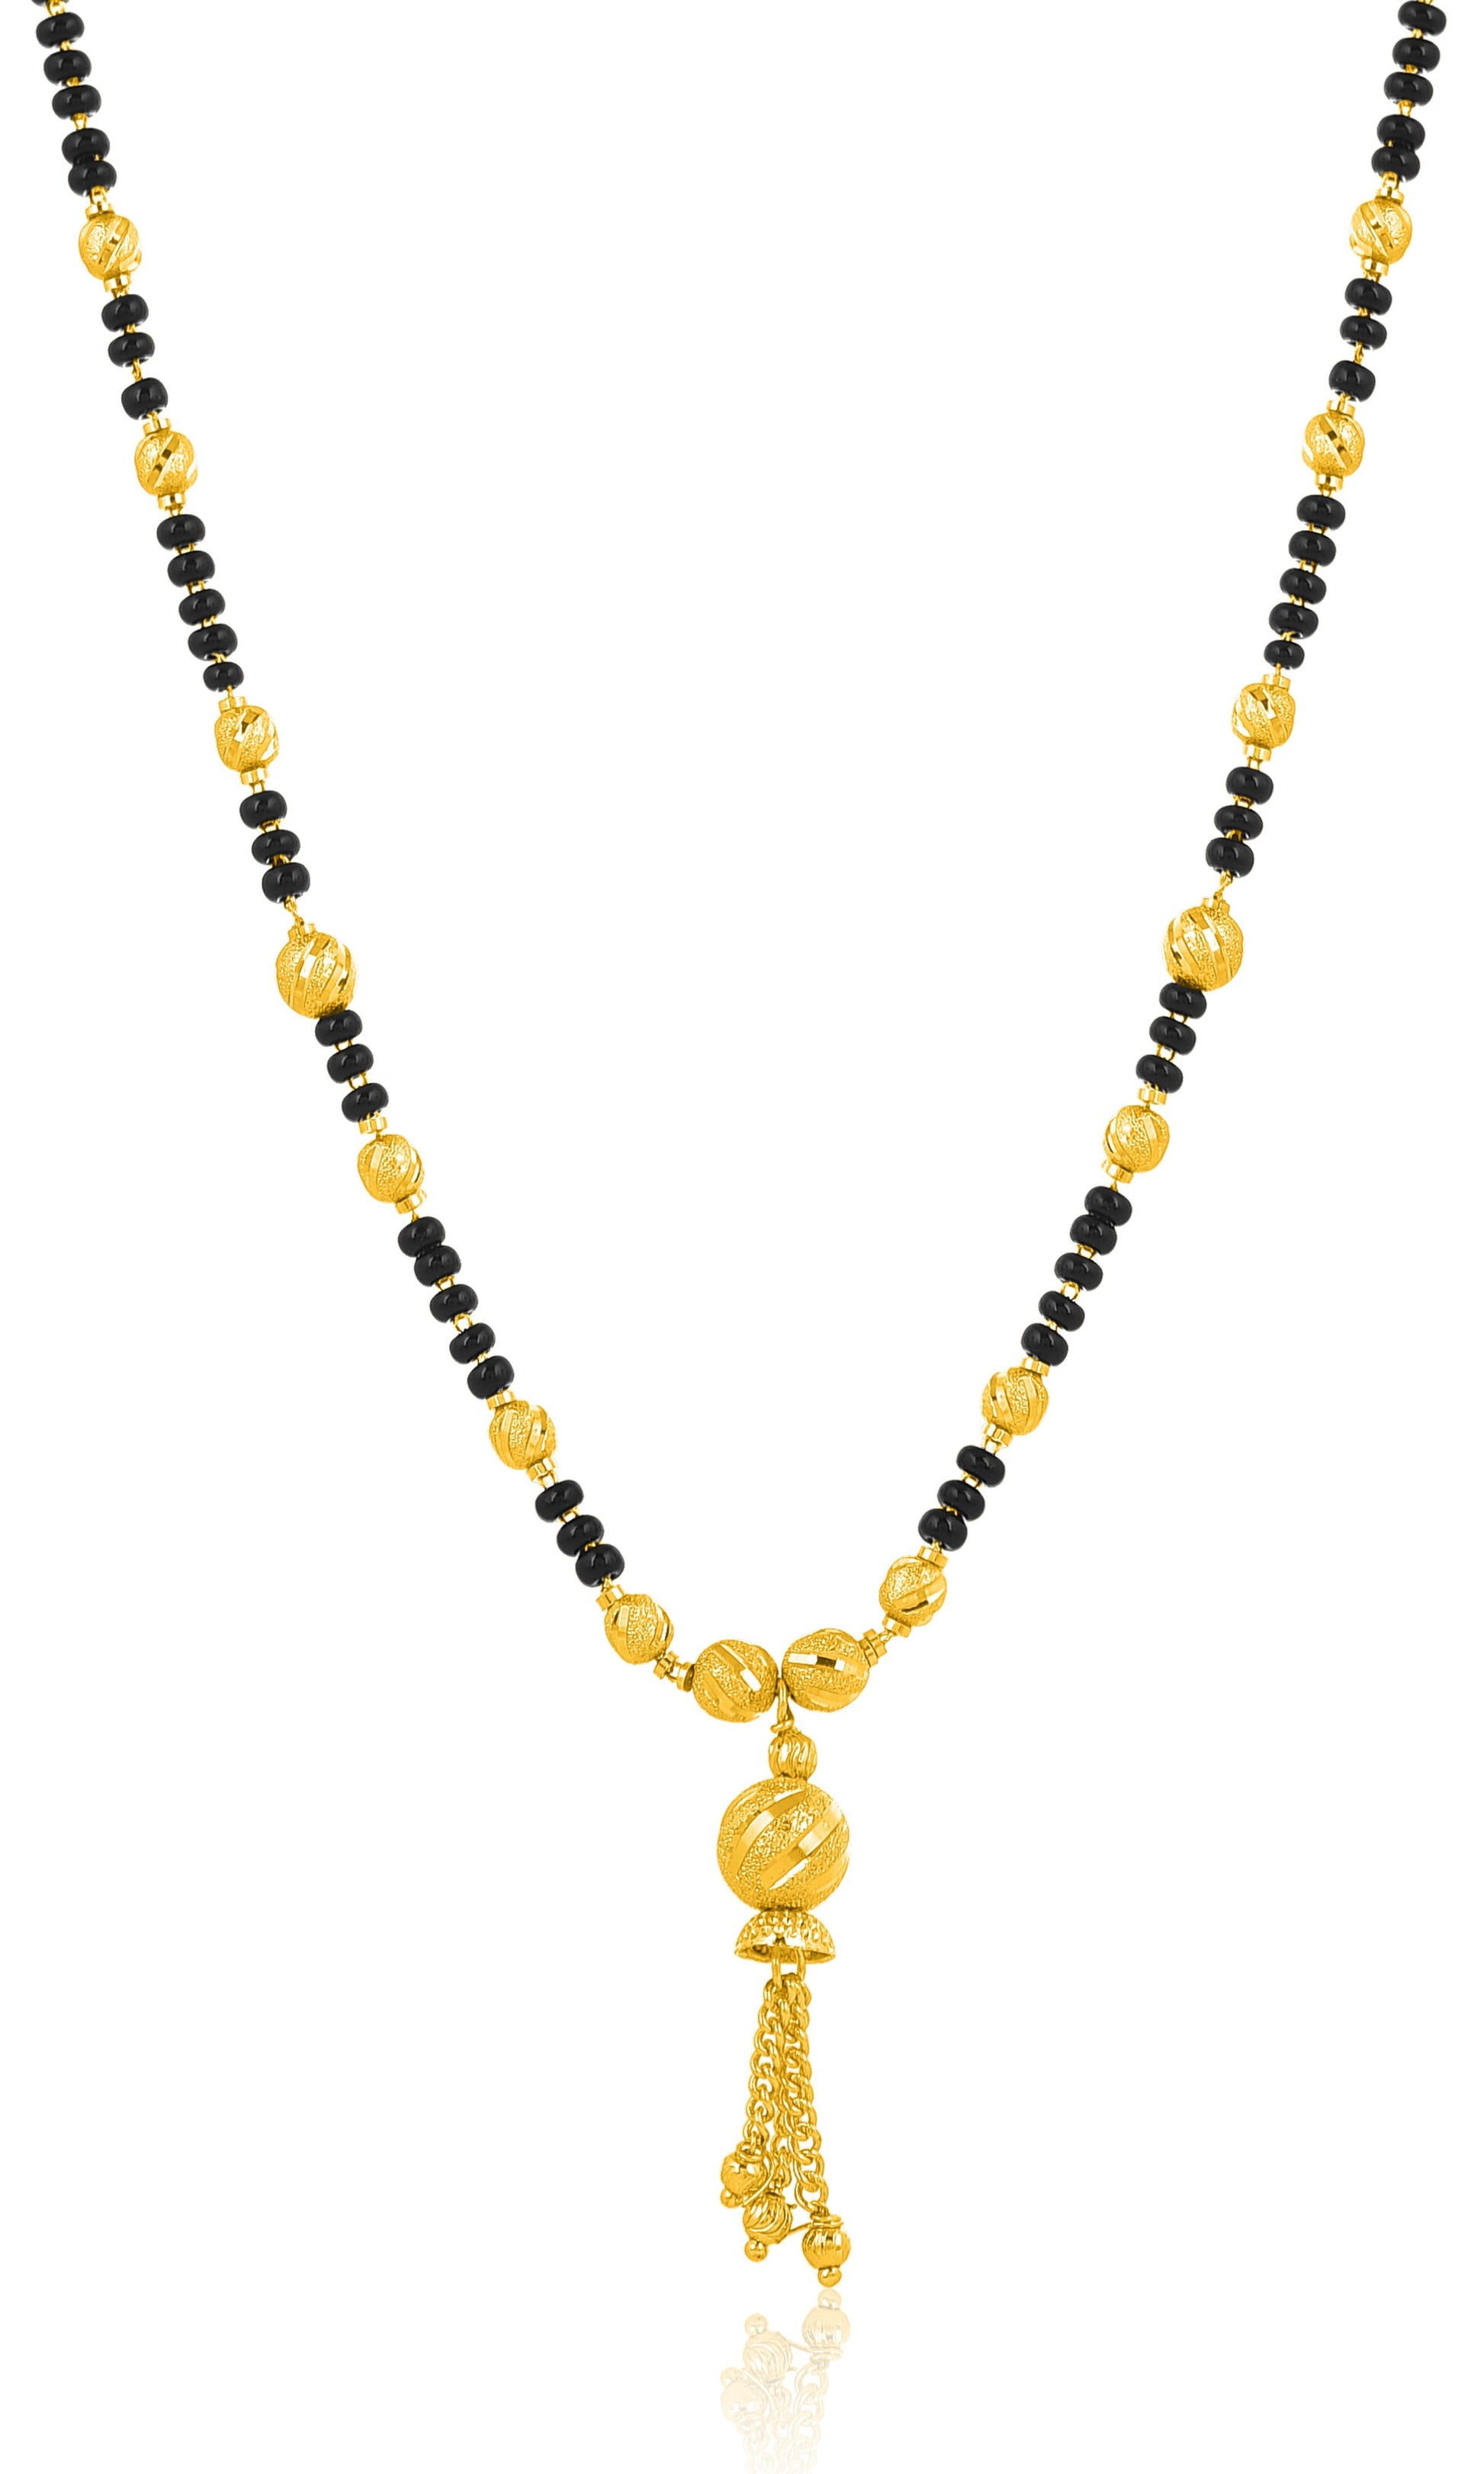 Gold Plated Mangalsutra From Bhagya Lakshmi | Buy Mangalsutra Online